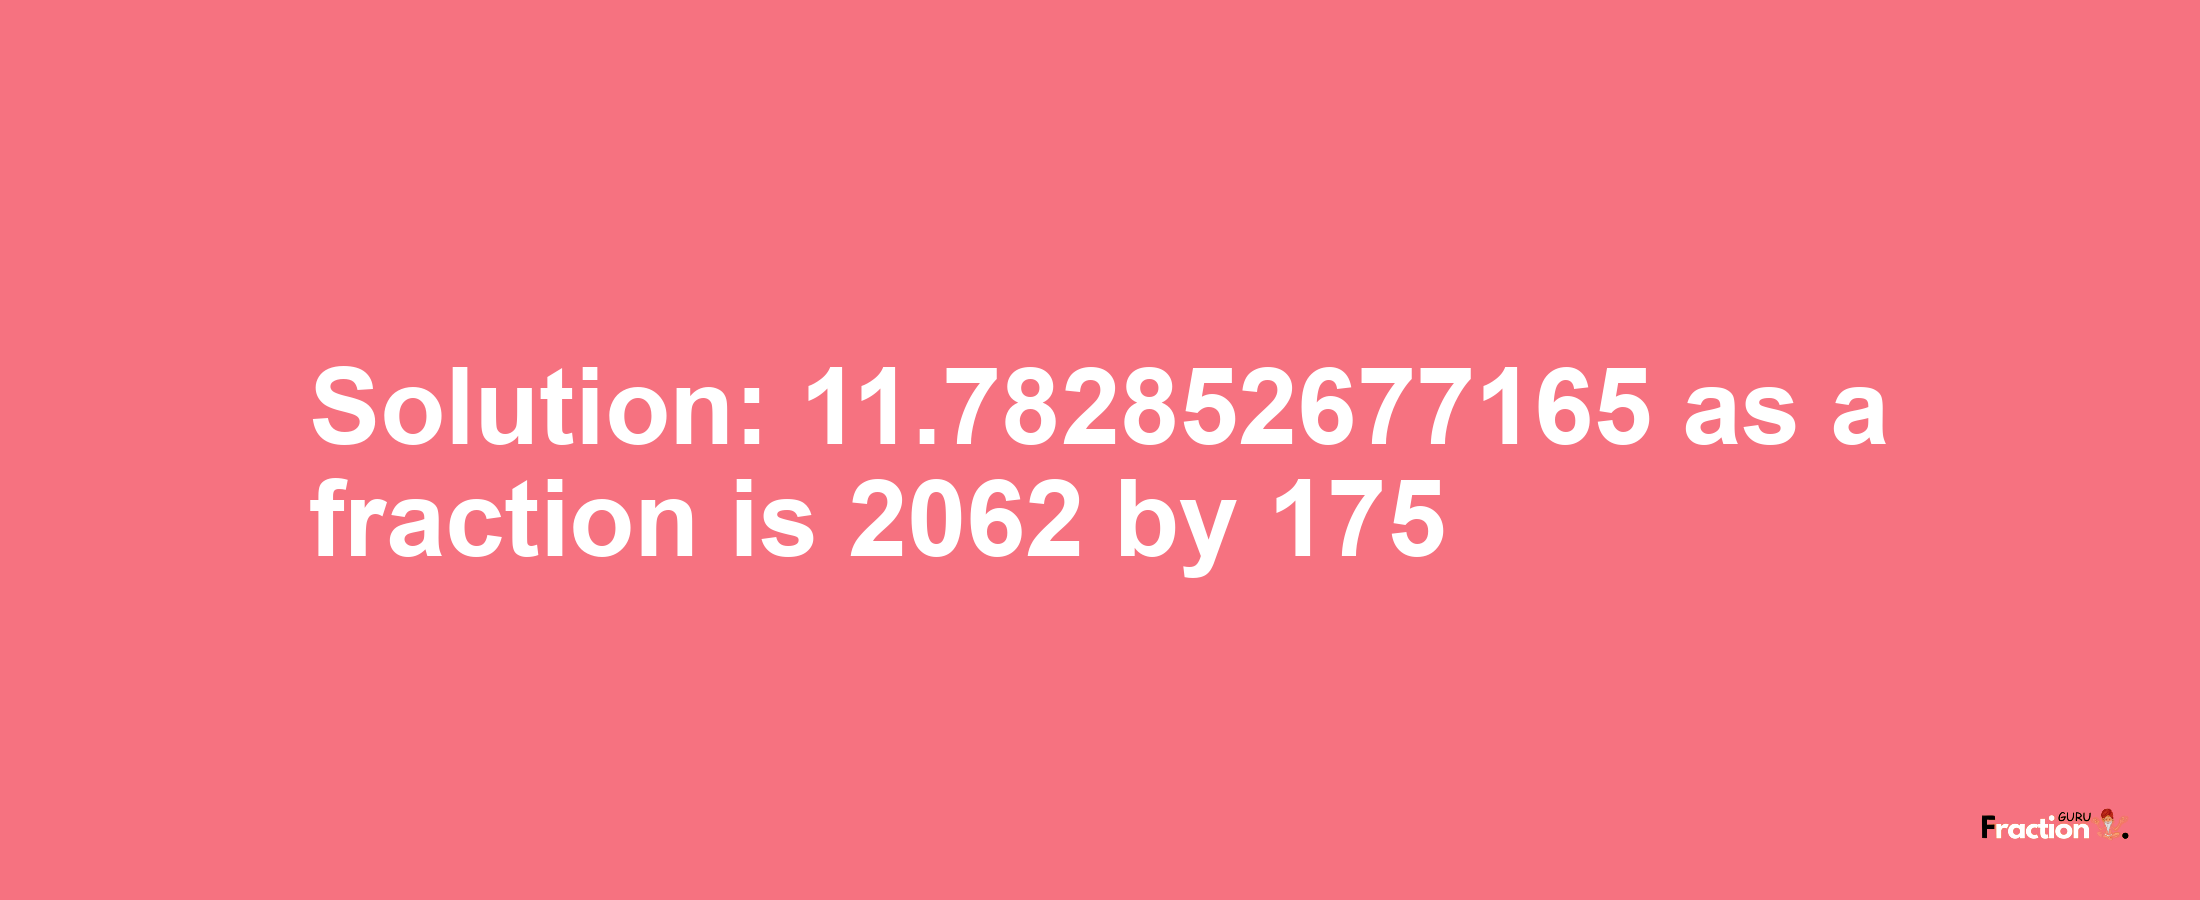 Solution:11.782852677165 as a fraction is 2062/175